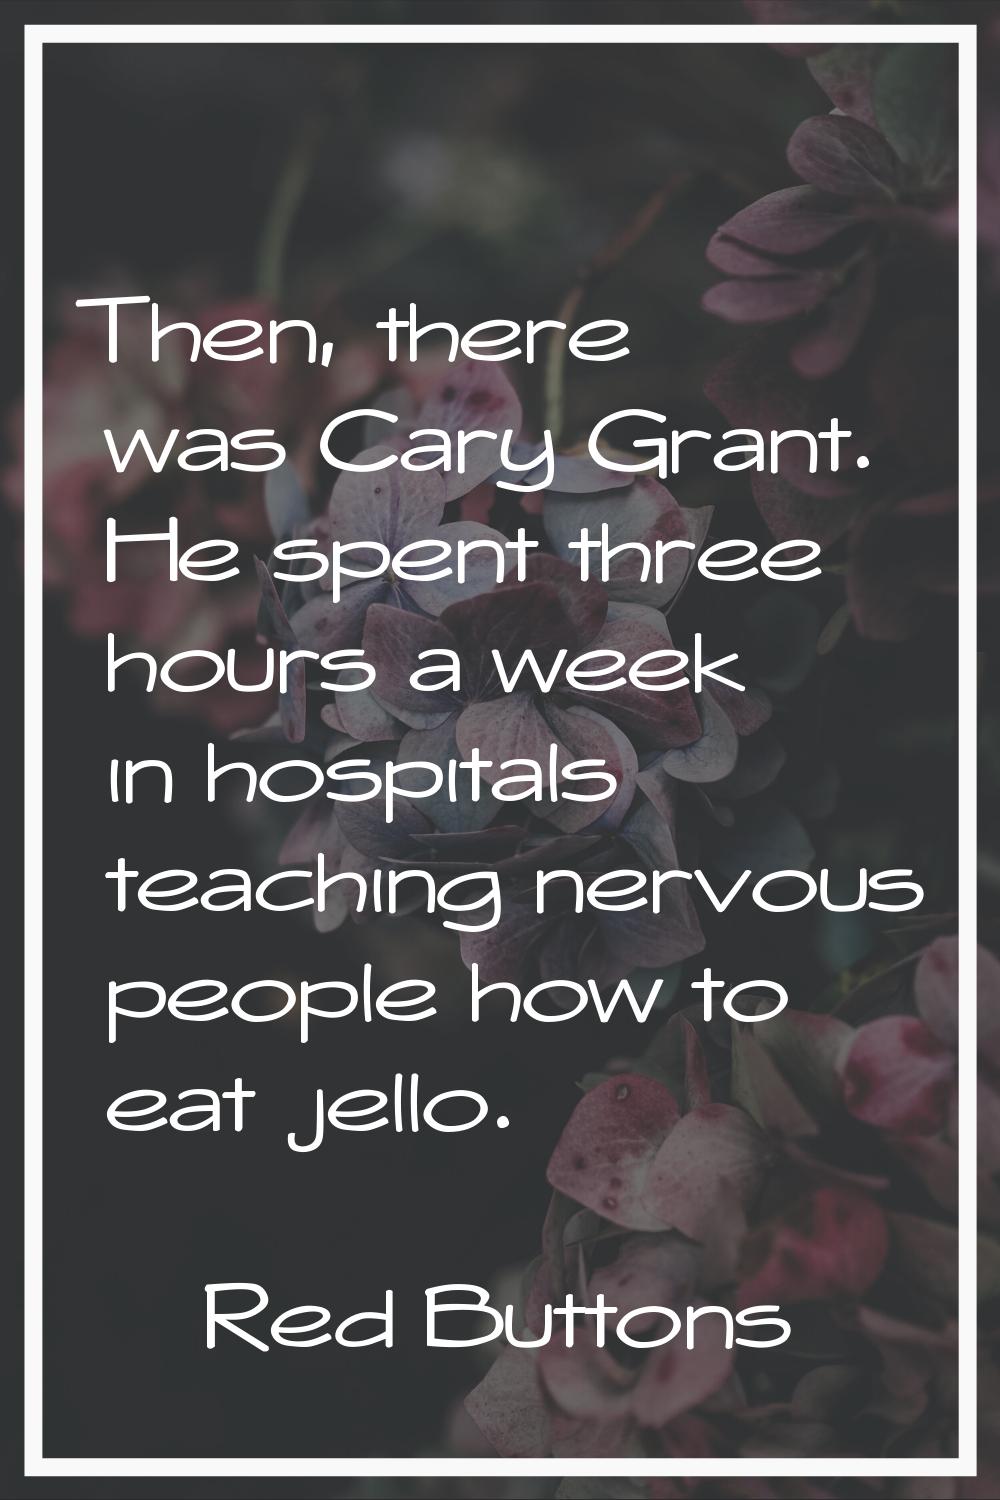 Then, there was Cary Grant. He spent three hours a week in hospitals teaching nervous people how to